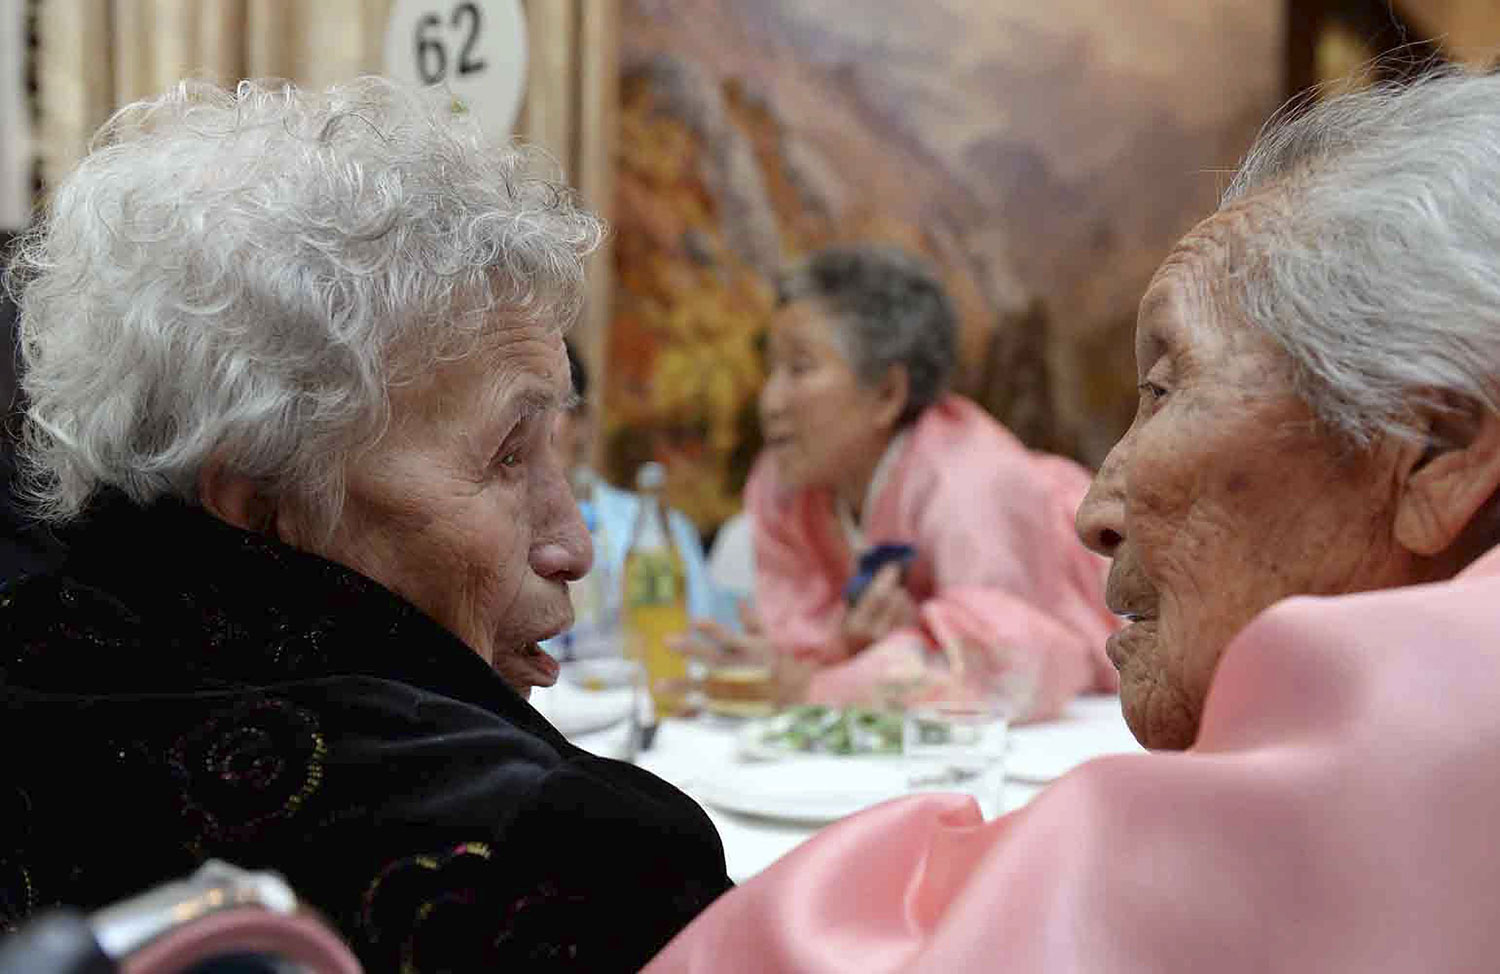 South Korean Lee Young-Shil, 88, meets with her North Korean younger sister Kim Seok-Ryu, 80, during the Separated Family Reunion Meeting at Diamond Mountain resort in North Korea on Feb. 20, 2014.